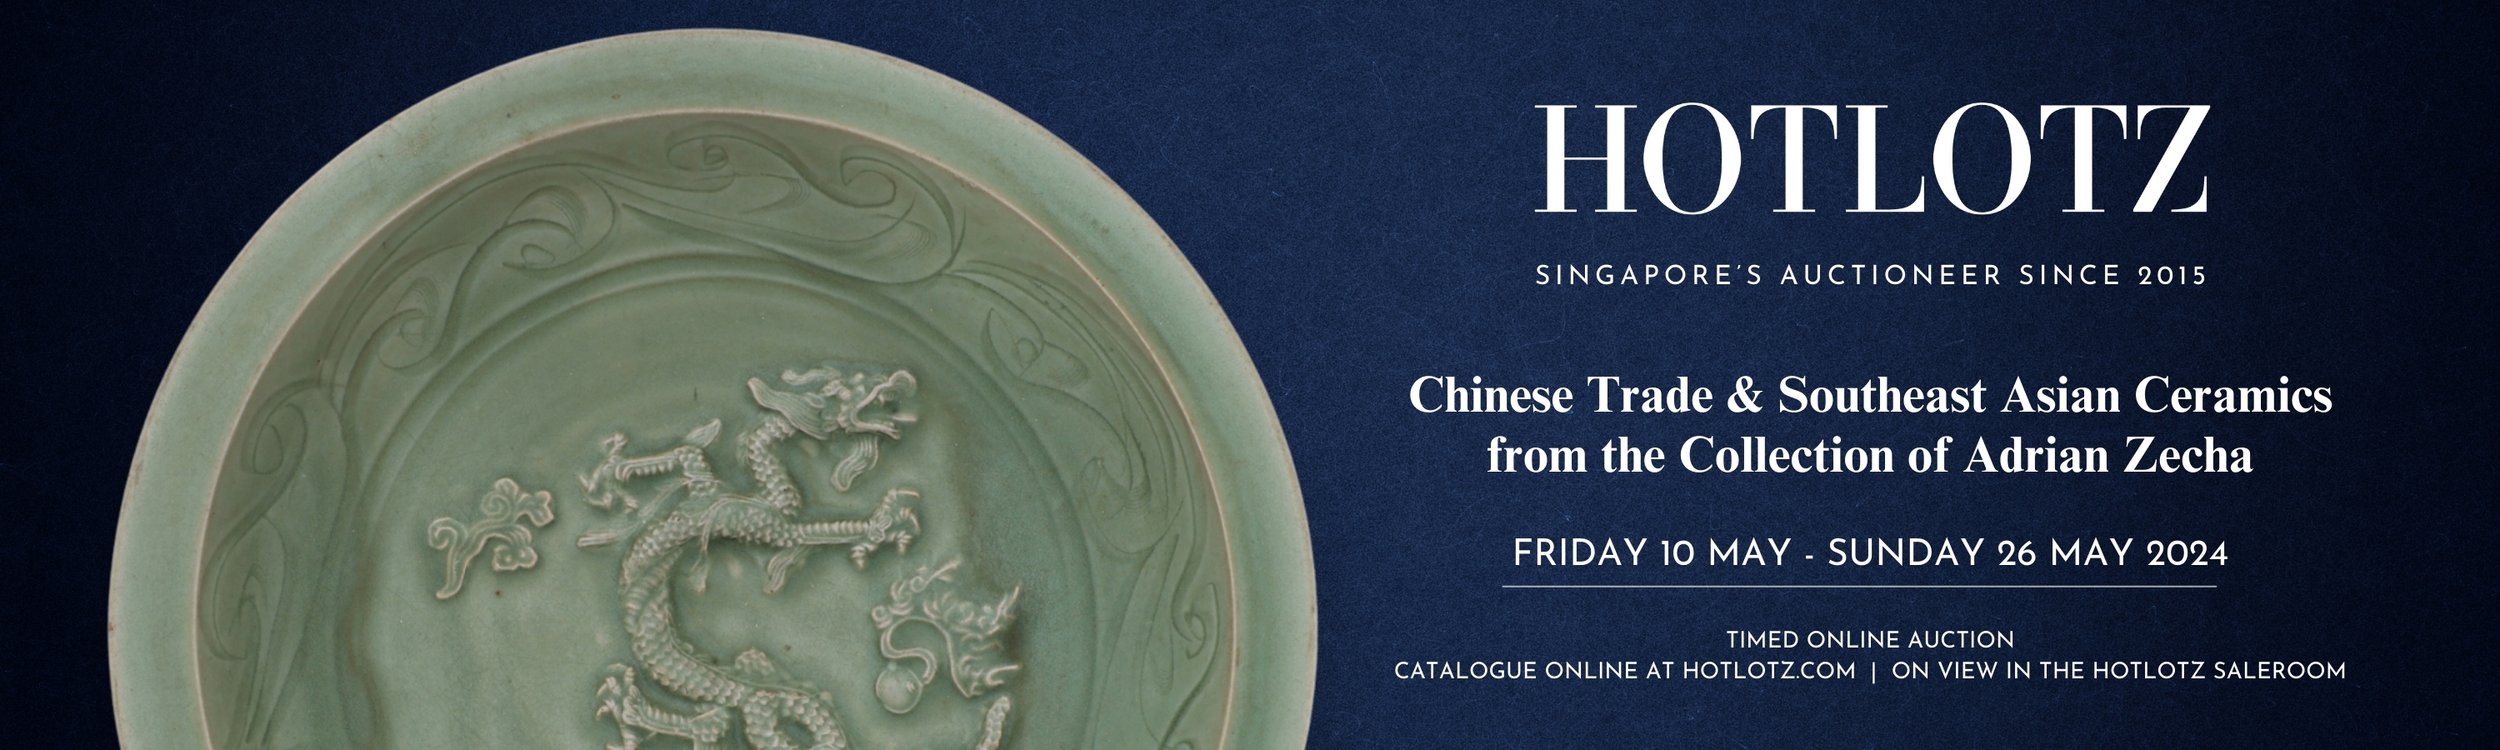  https://www.hotlotz.com/auctions/forthcoming-detail/chinese-trade-southeast-asian-ceramics-from-the-collection-of-adrian-zecha-2024-03-15-155713 